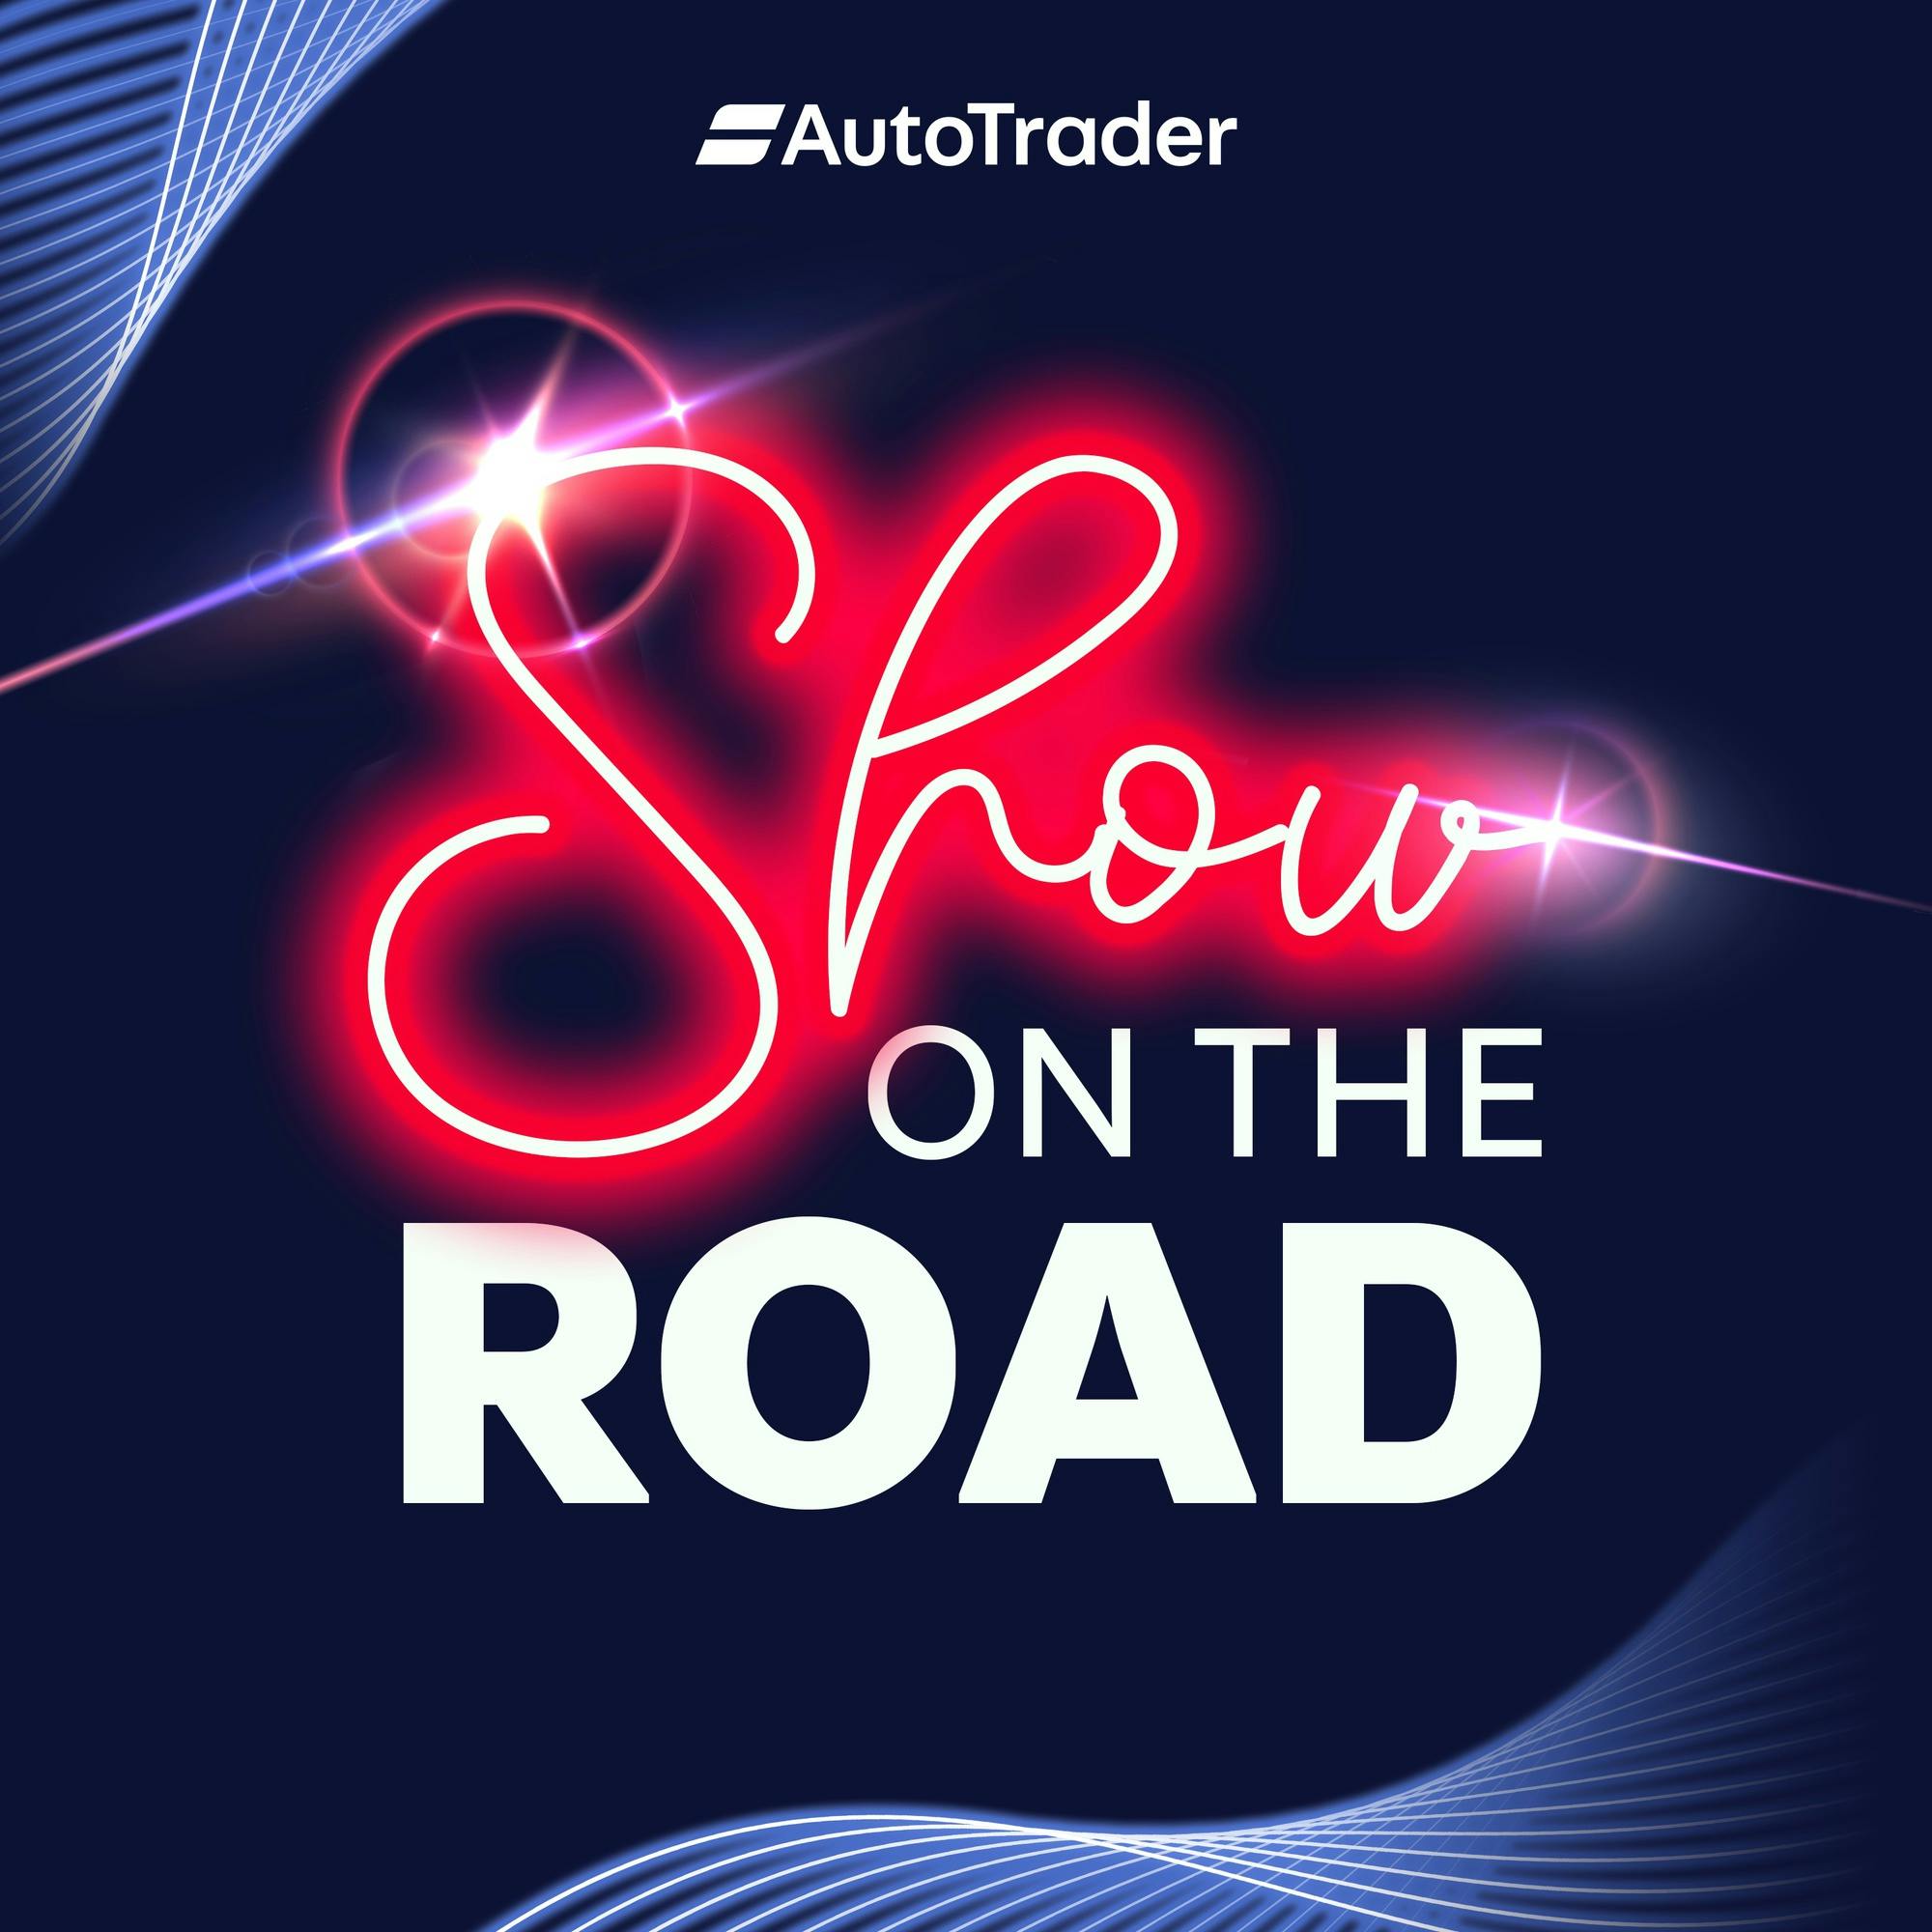 Introducing... Show on the Road